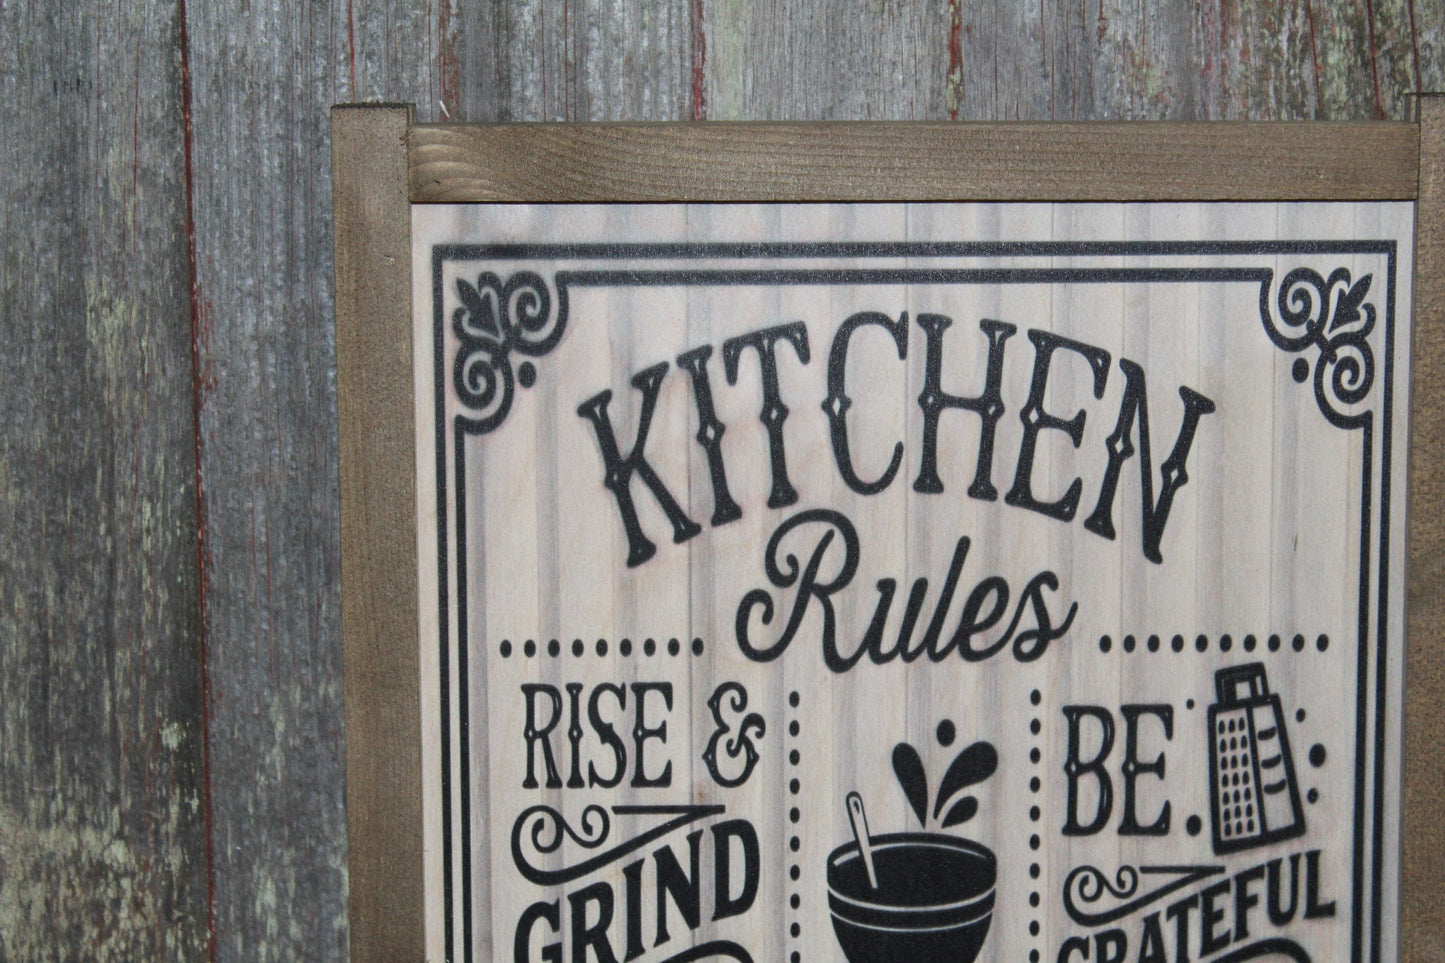 Kitchen Rules Wood Sign Shiplap Silly Funny Pun Don't Flip Out Eat it or Starve Whip It Good Wall Art Farmhouse Primitive Rustic Text Large